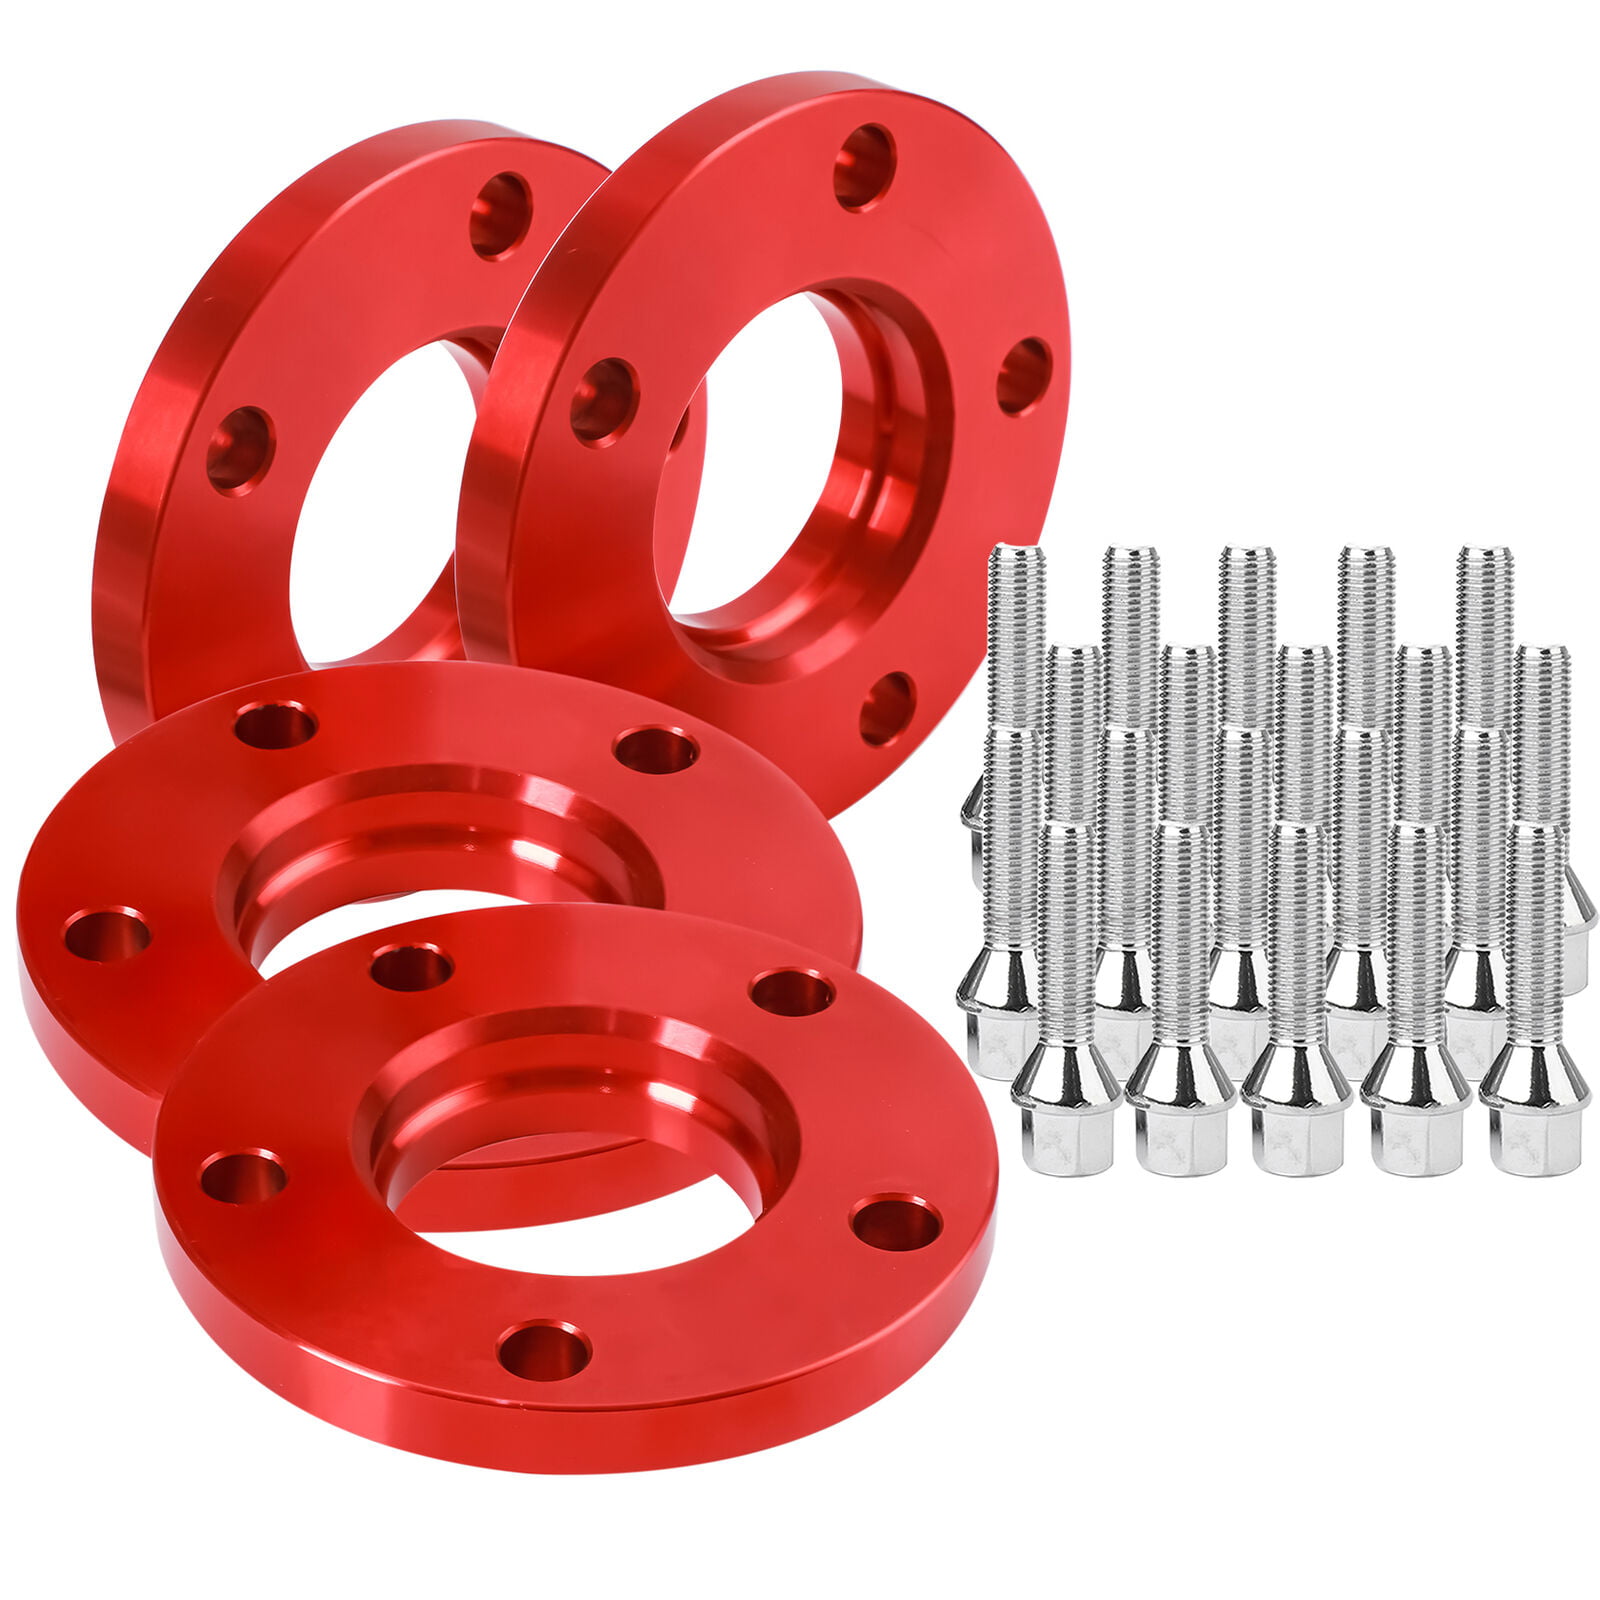 Centric Wheel Spacer Staggered Kit 2 2 20mm W/ Extended Bolt Fit For BMW 15mm &